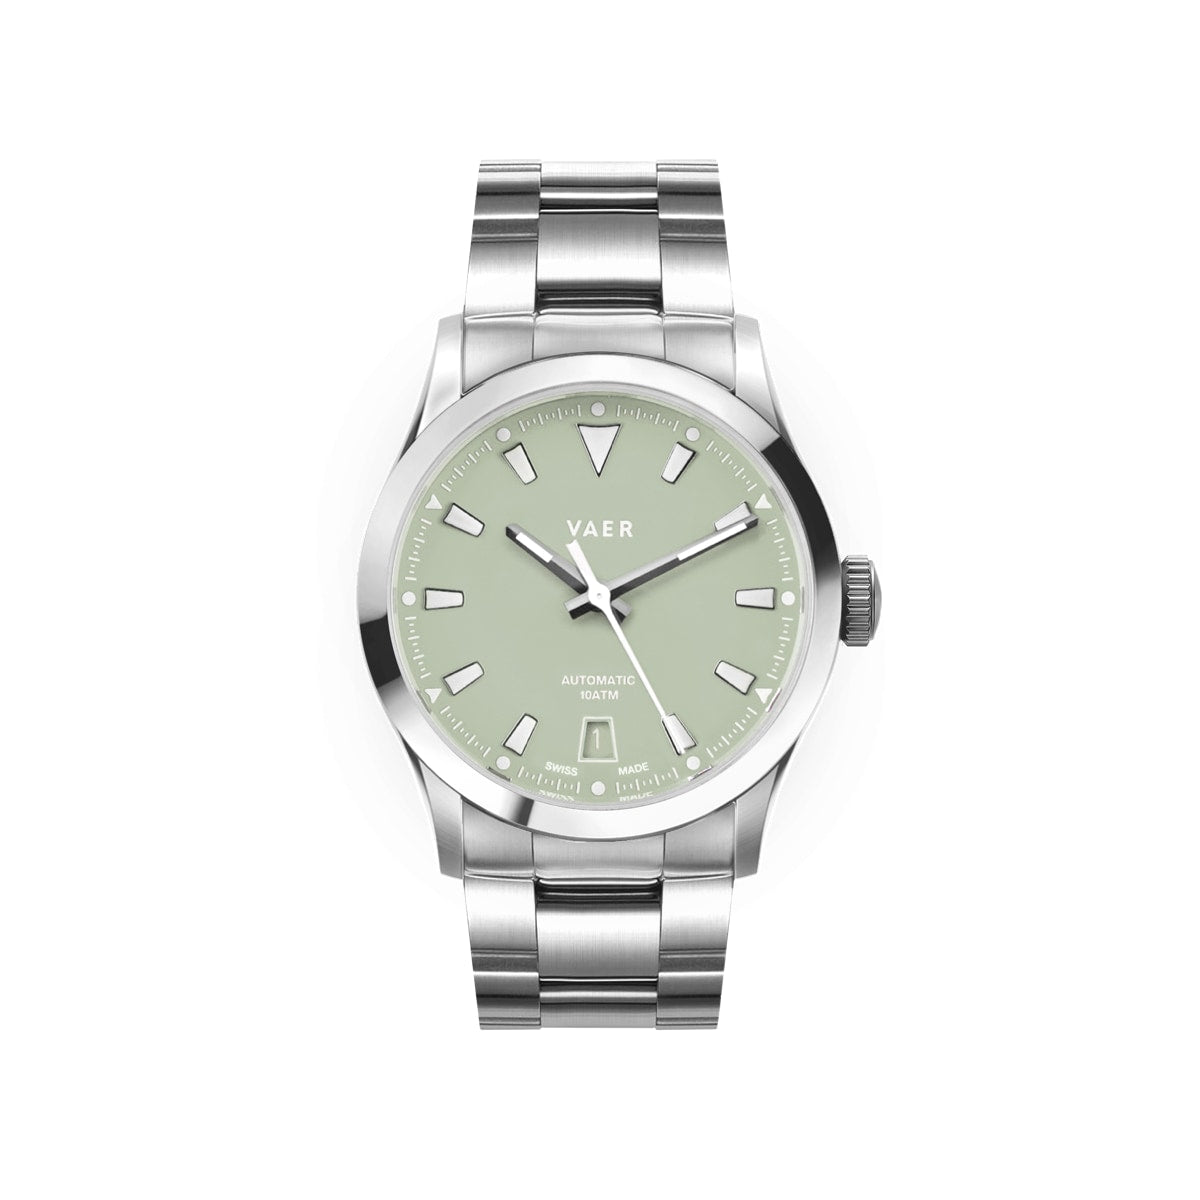 A7 Atlas Olive - Swiss Made Auto 36mm